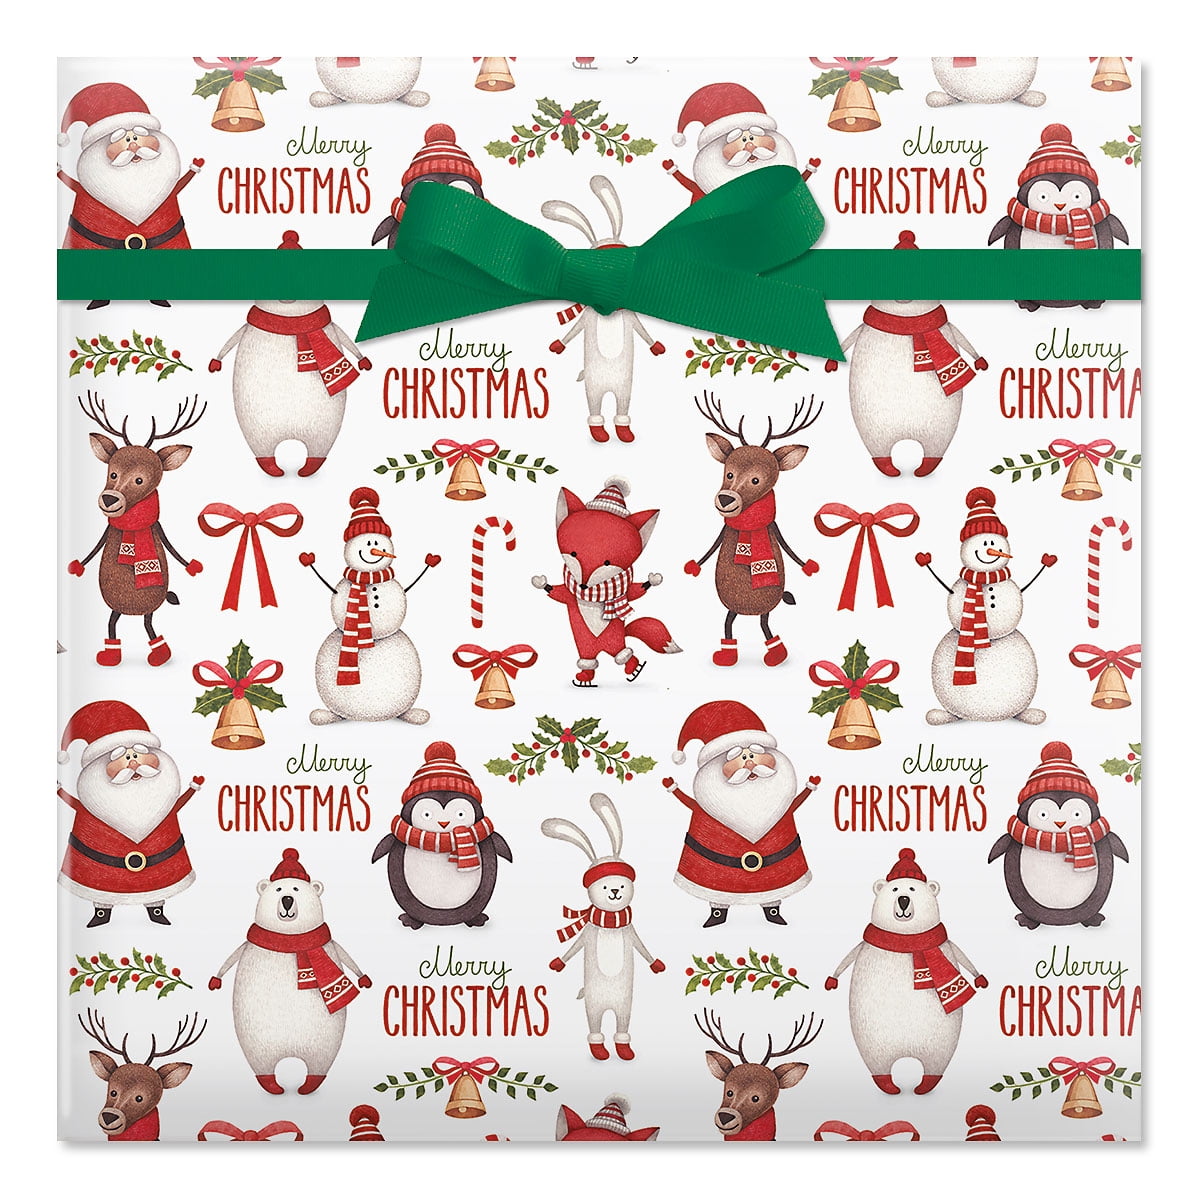 White/60x15CM Christmas Wrapping Paper Storage Bag Container Christmas Bauble Storage Bag Box Organizer Storage Bag Christmas Items Bag for Xmas Decoration Storage Bag